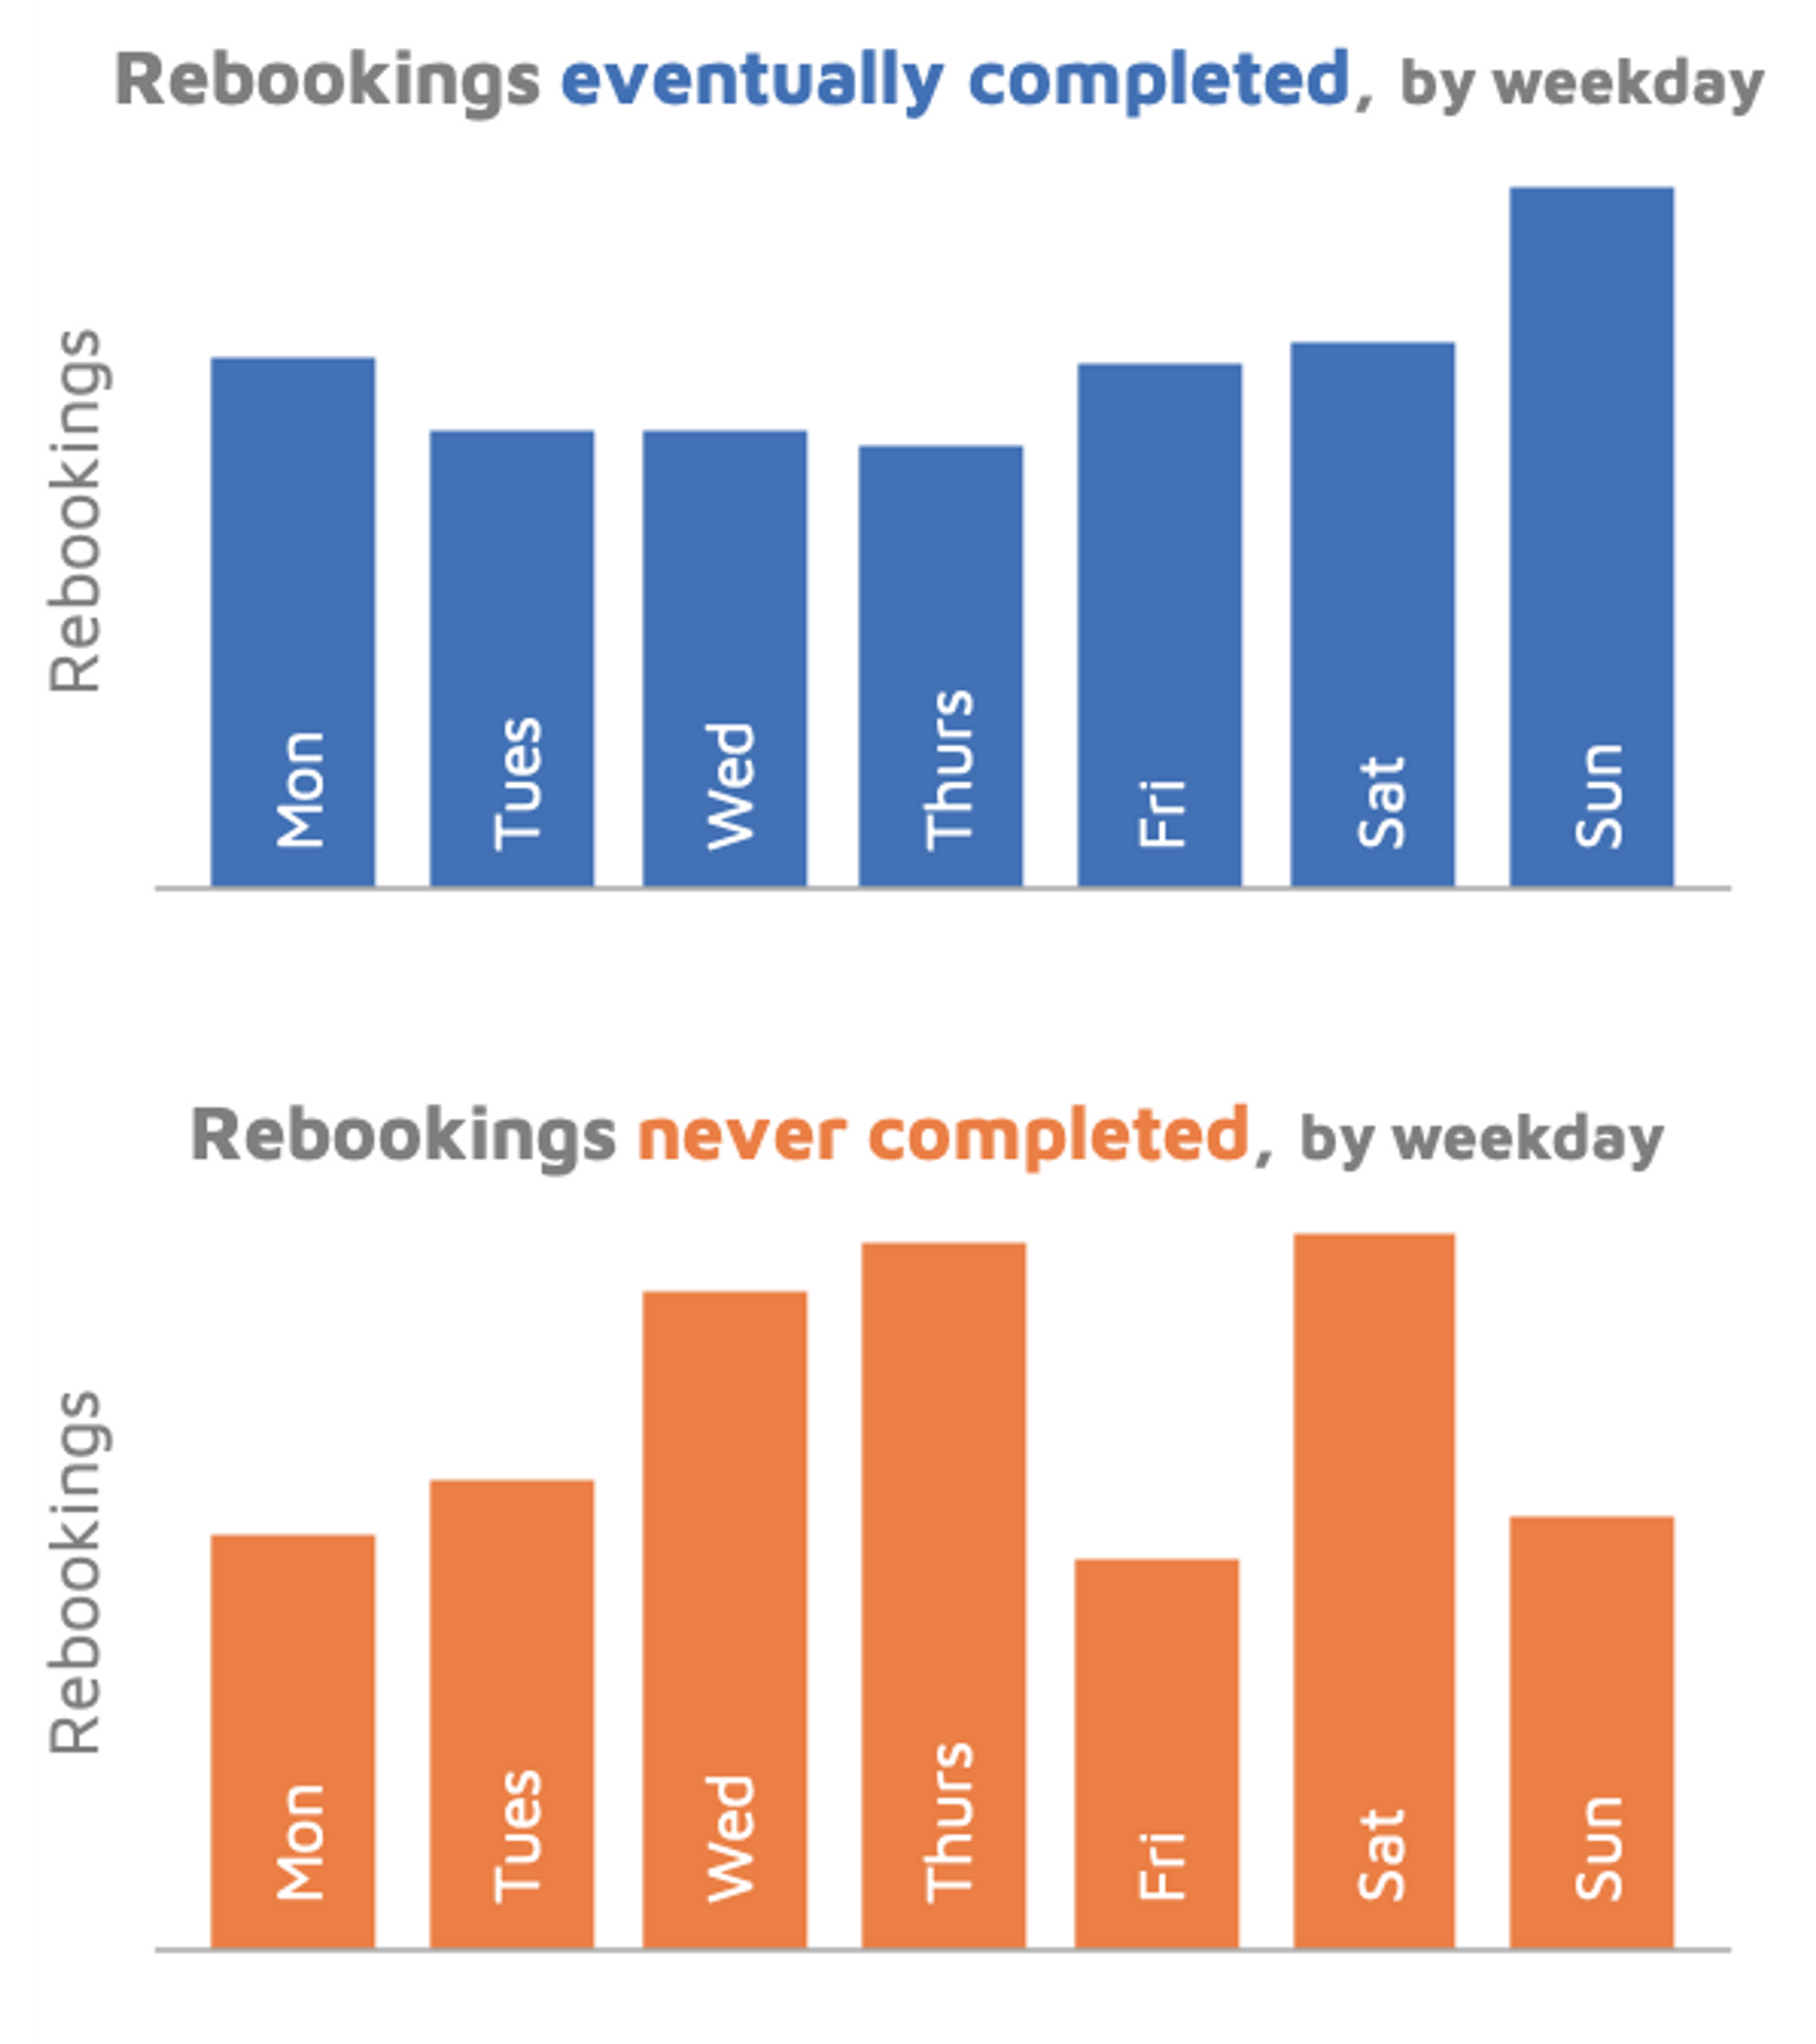 Rebooking eventually completed vs. never completed, by weekday